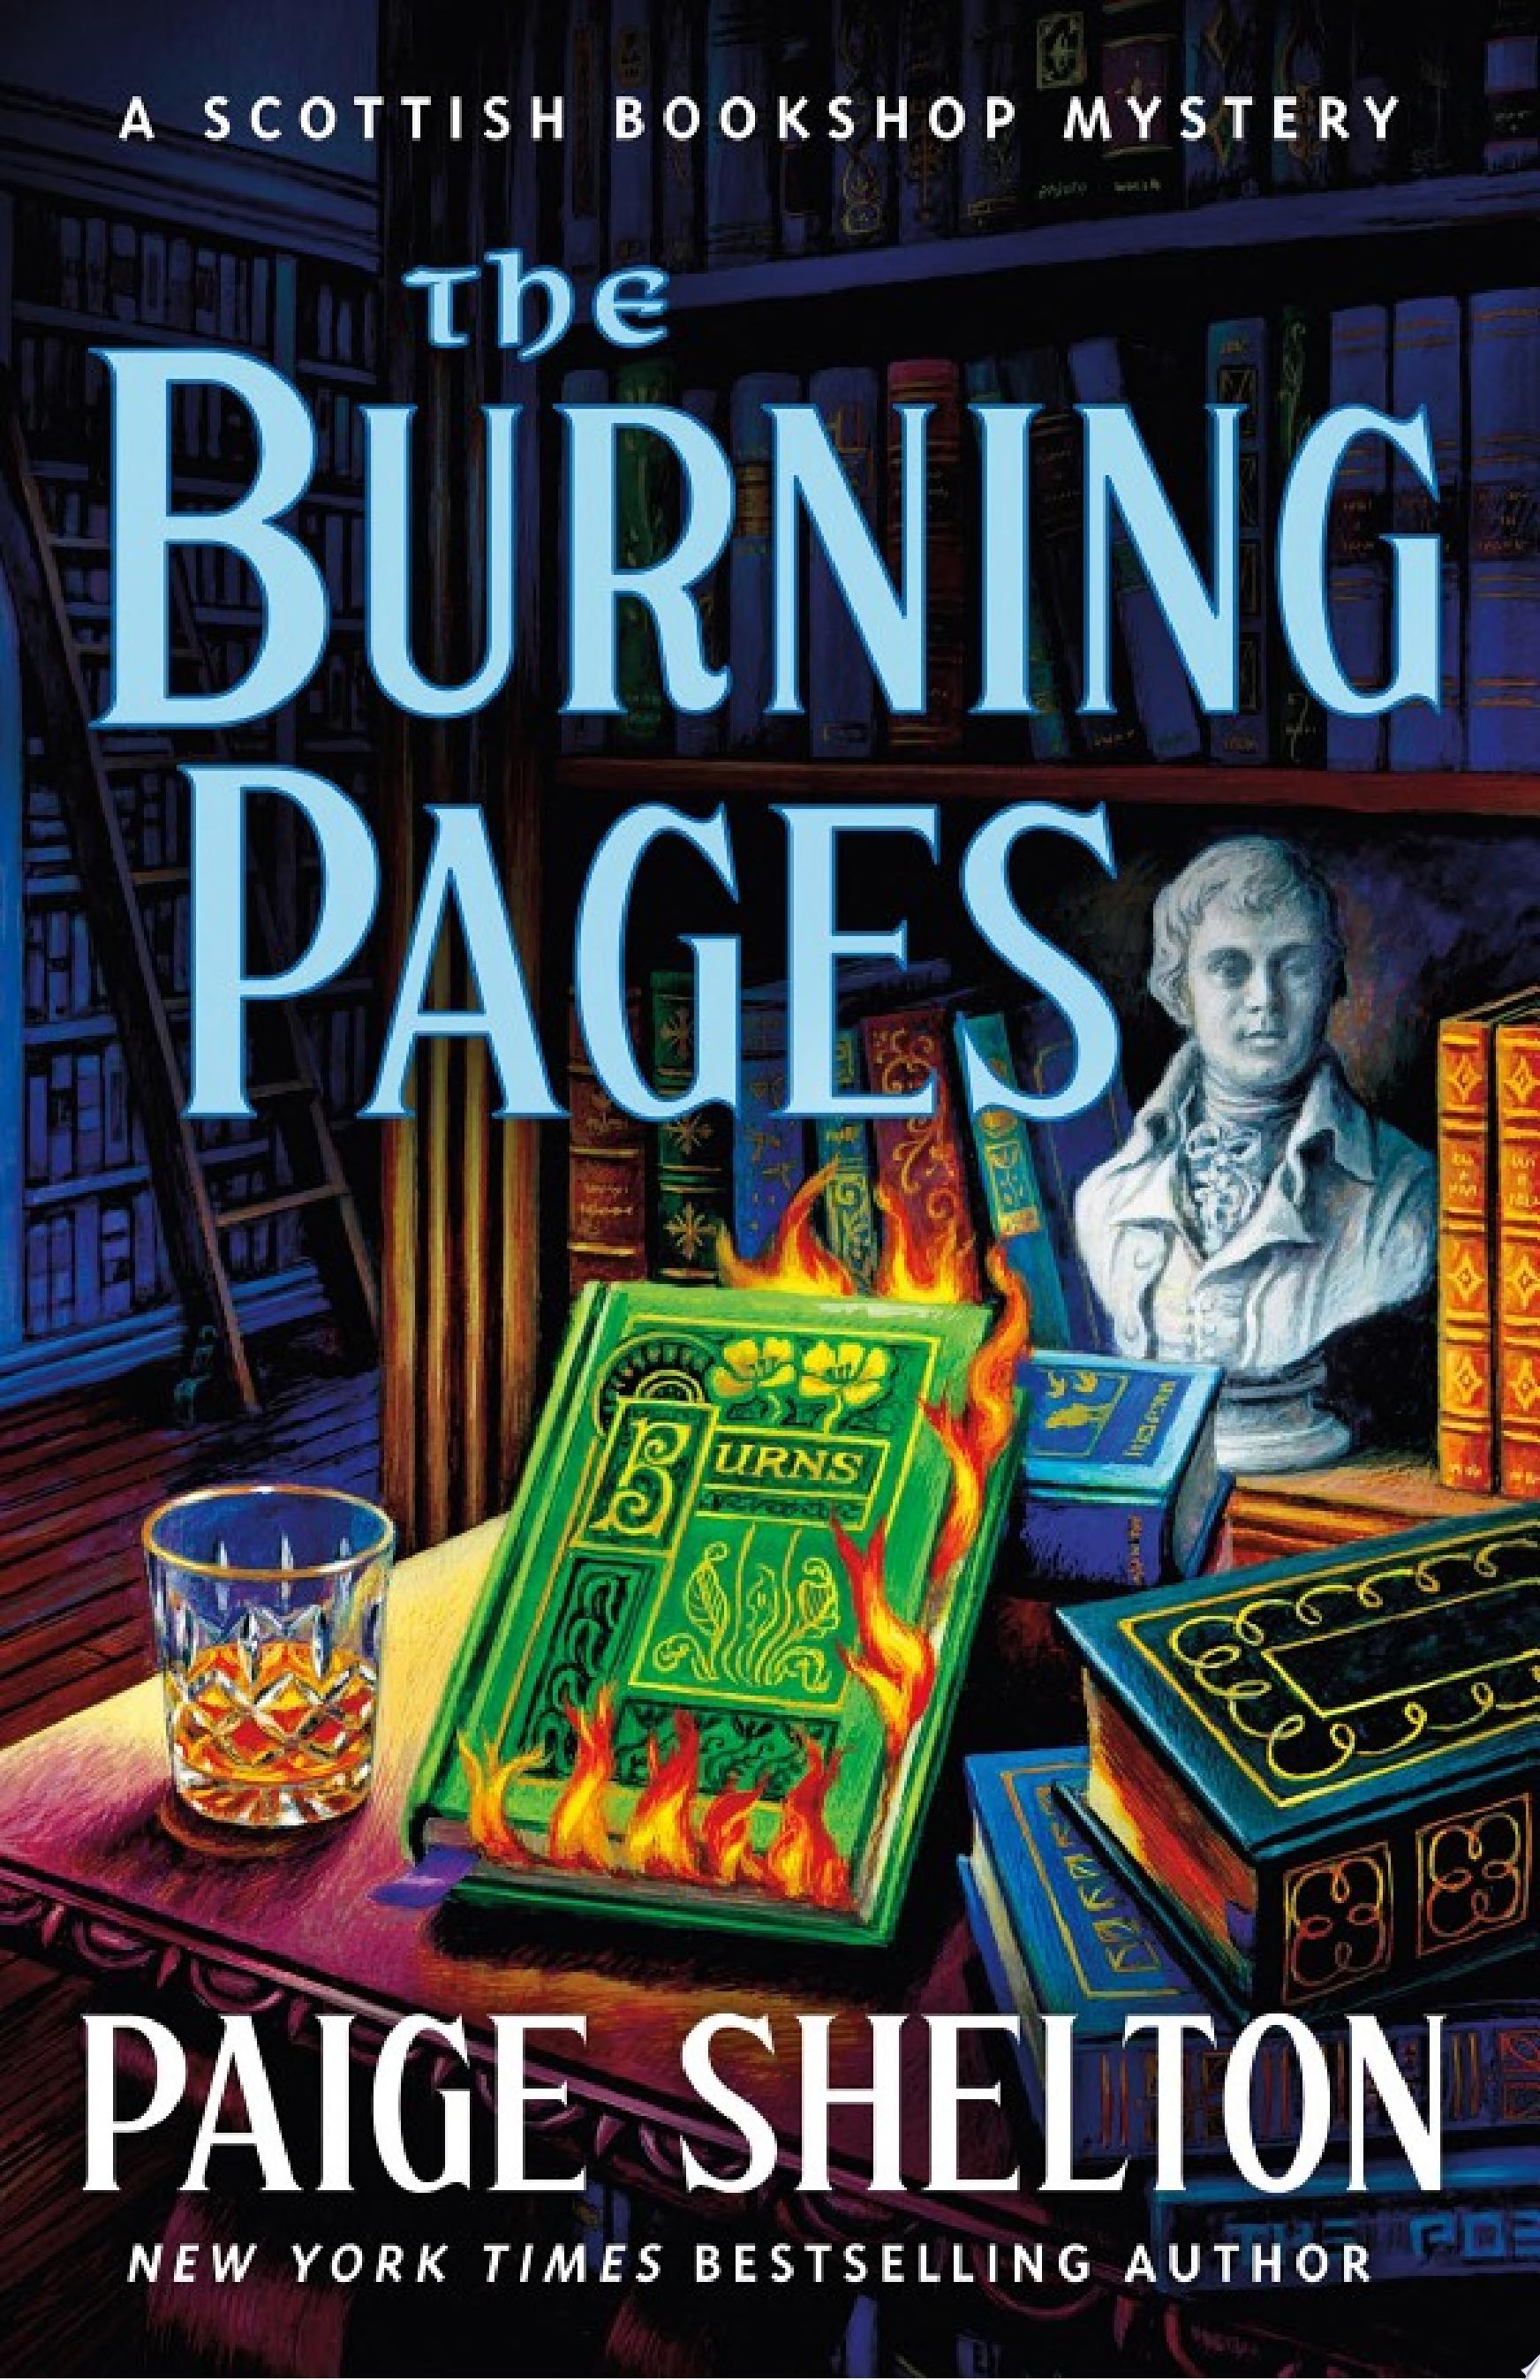 Image for "The Burning Pages"